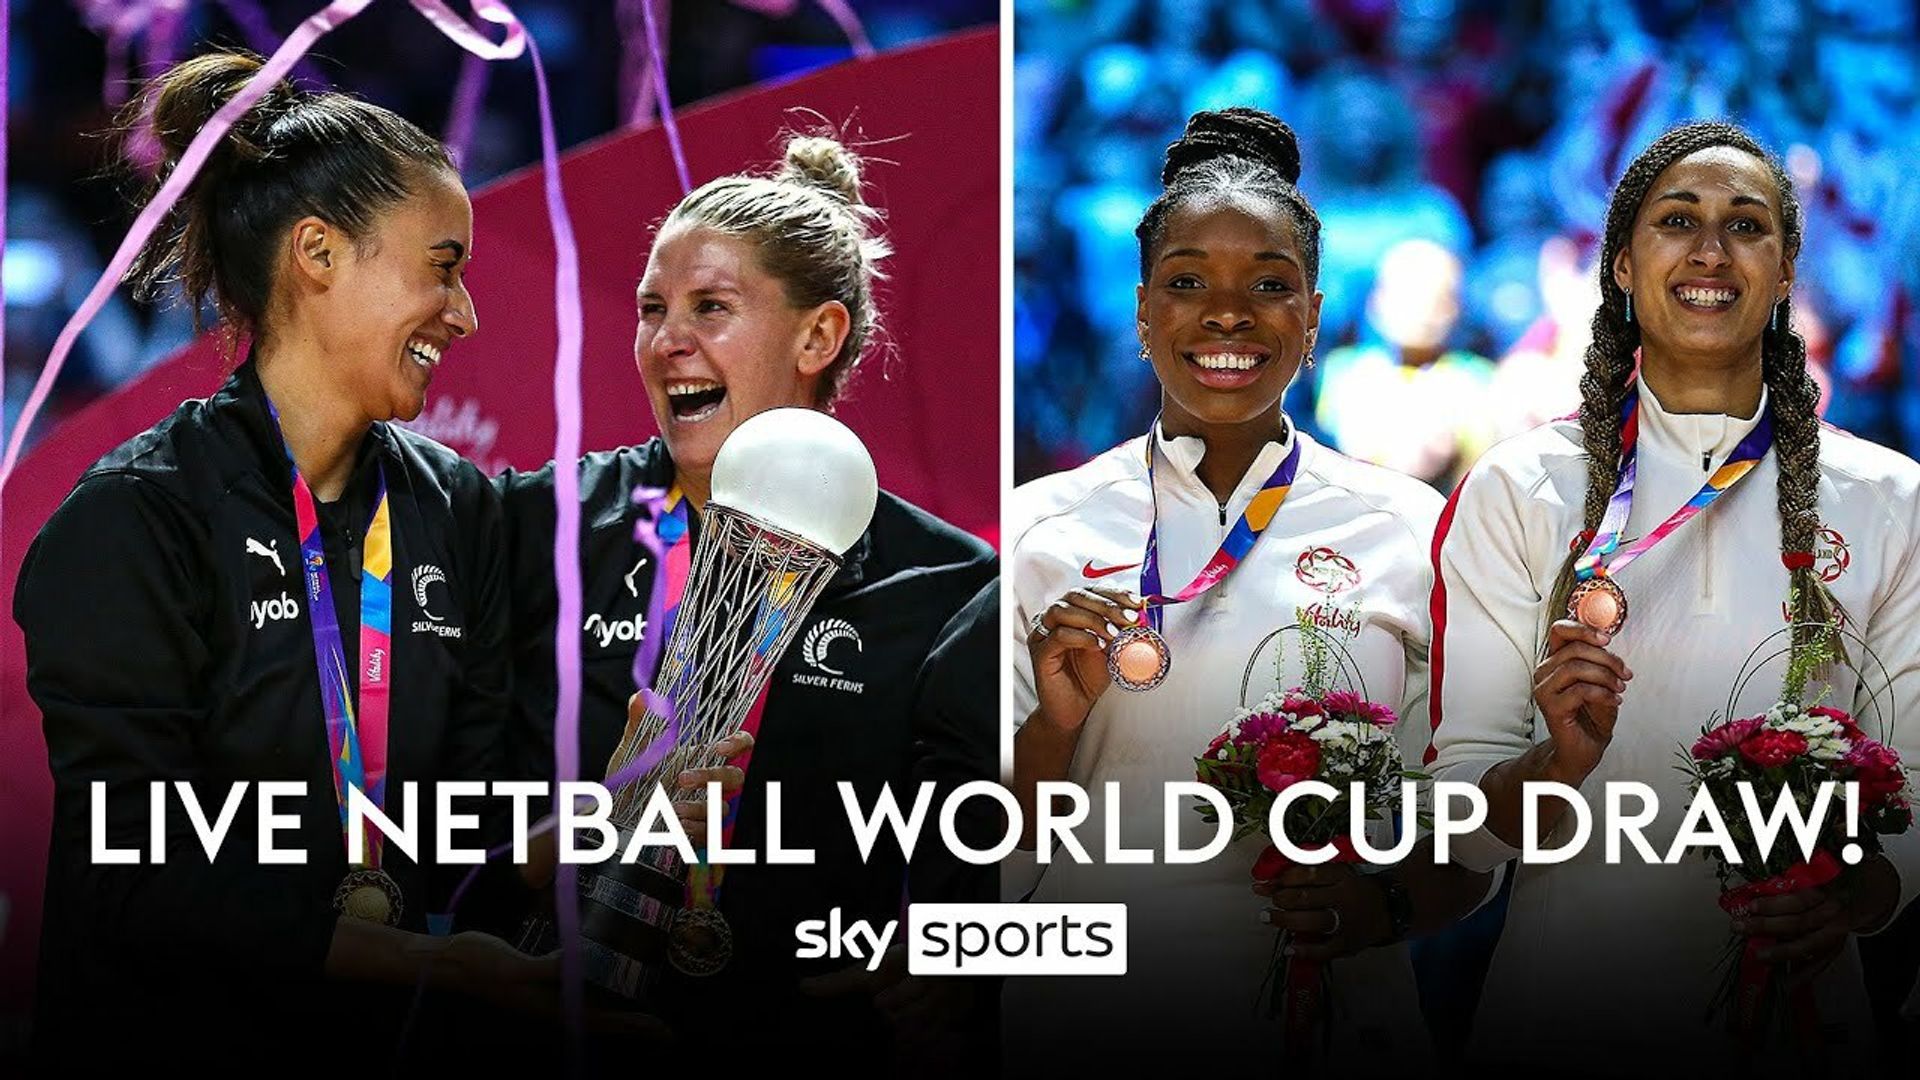 Watch live from 6pm: The Netball World Cup draw!